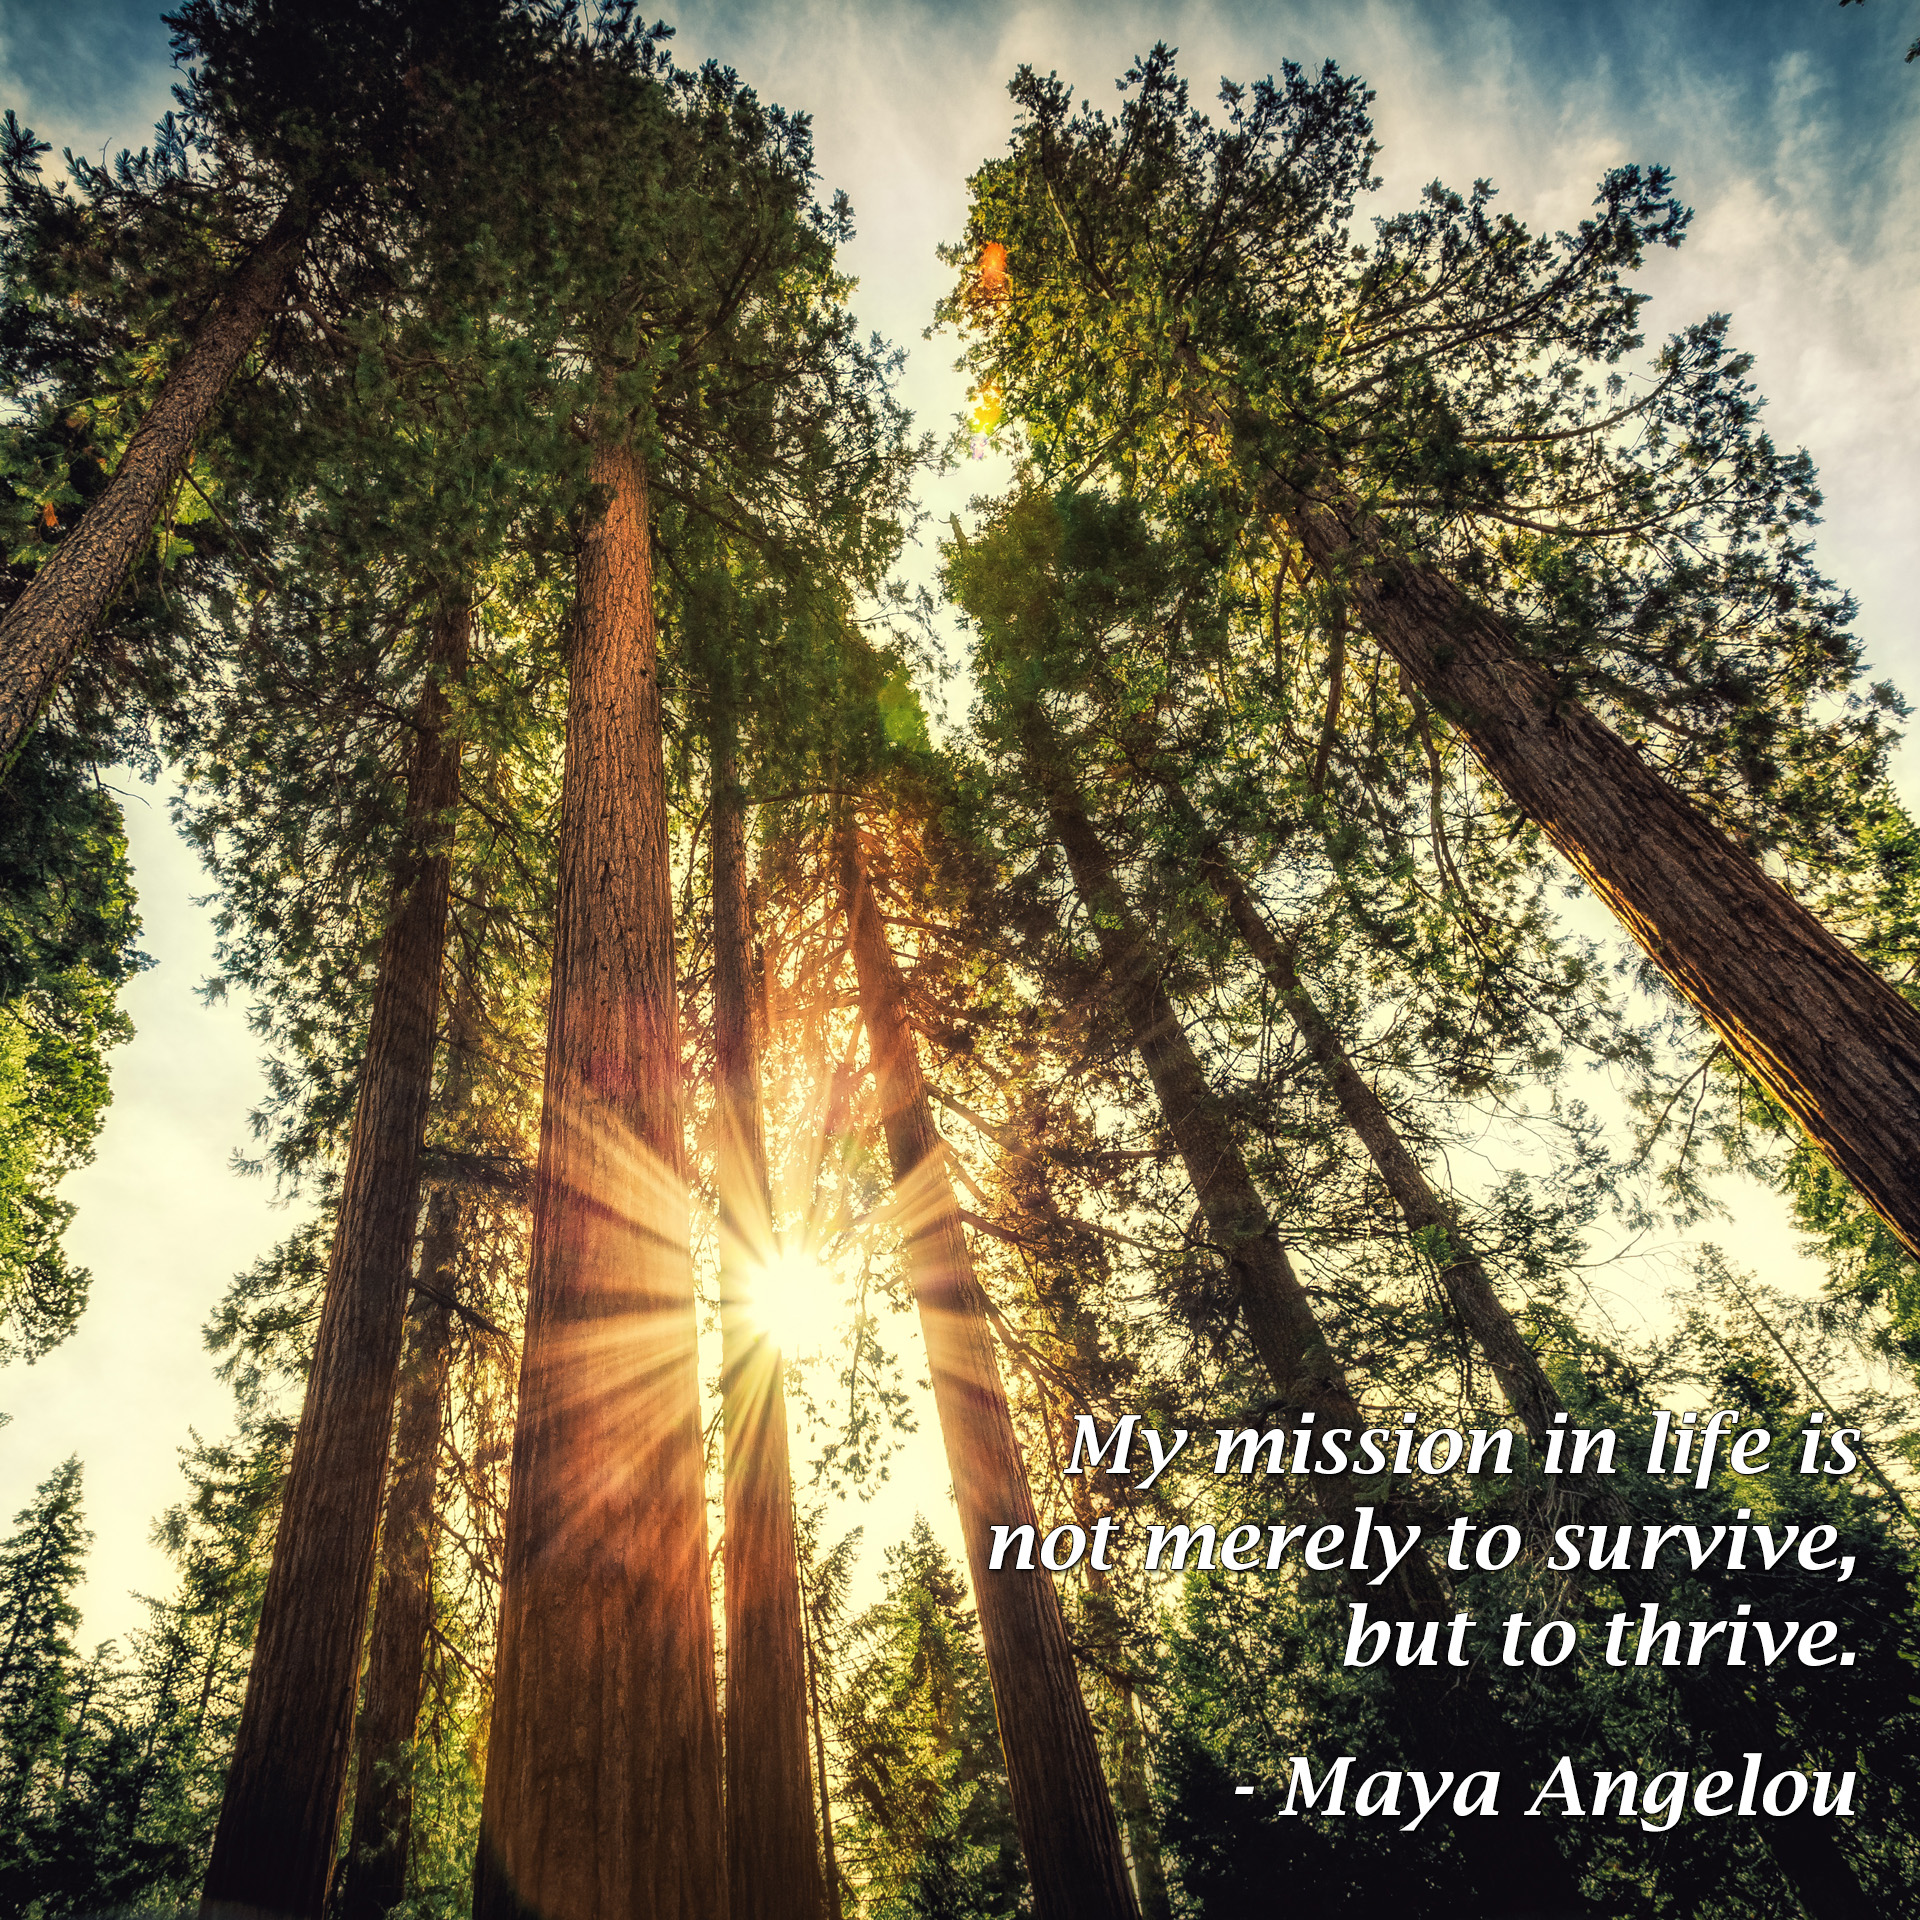 My mission in life is not merely to survive, but to thrive. - Maya Angelou